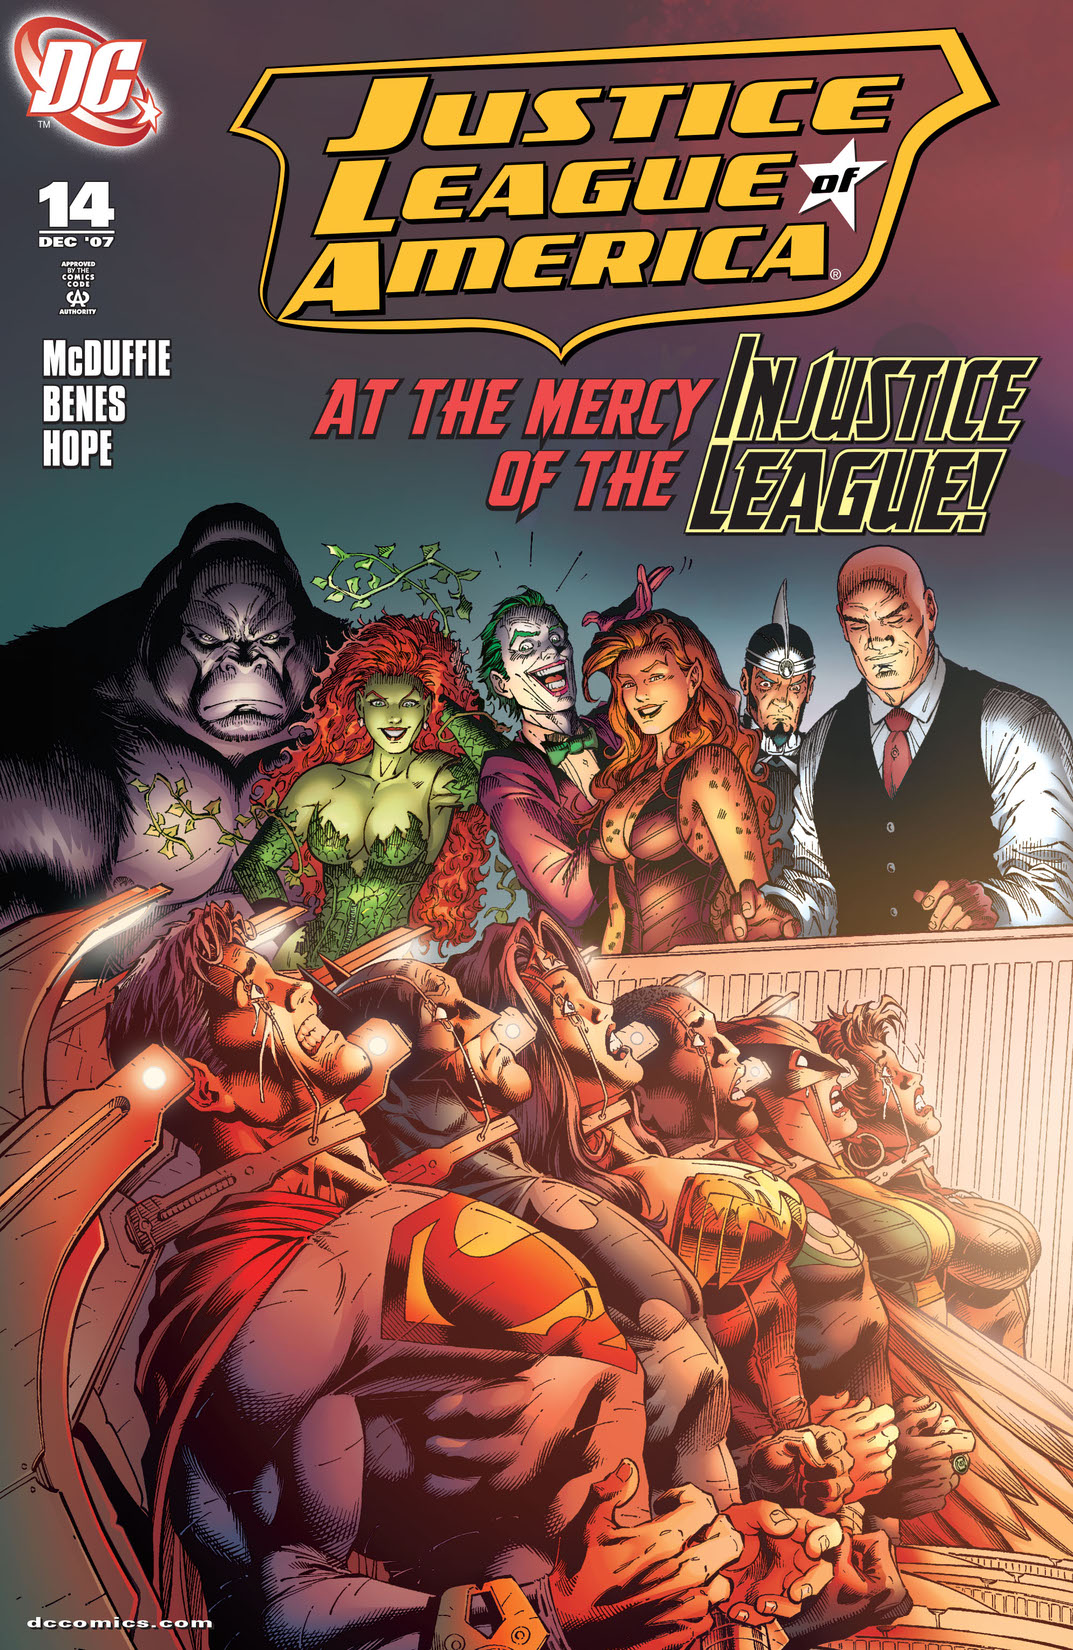 Justice League of America (2006-) #14 preview images